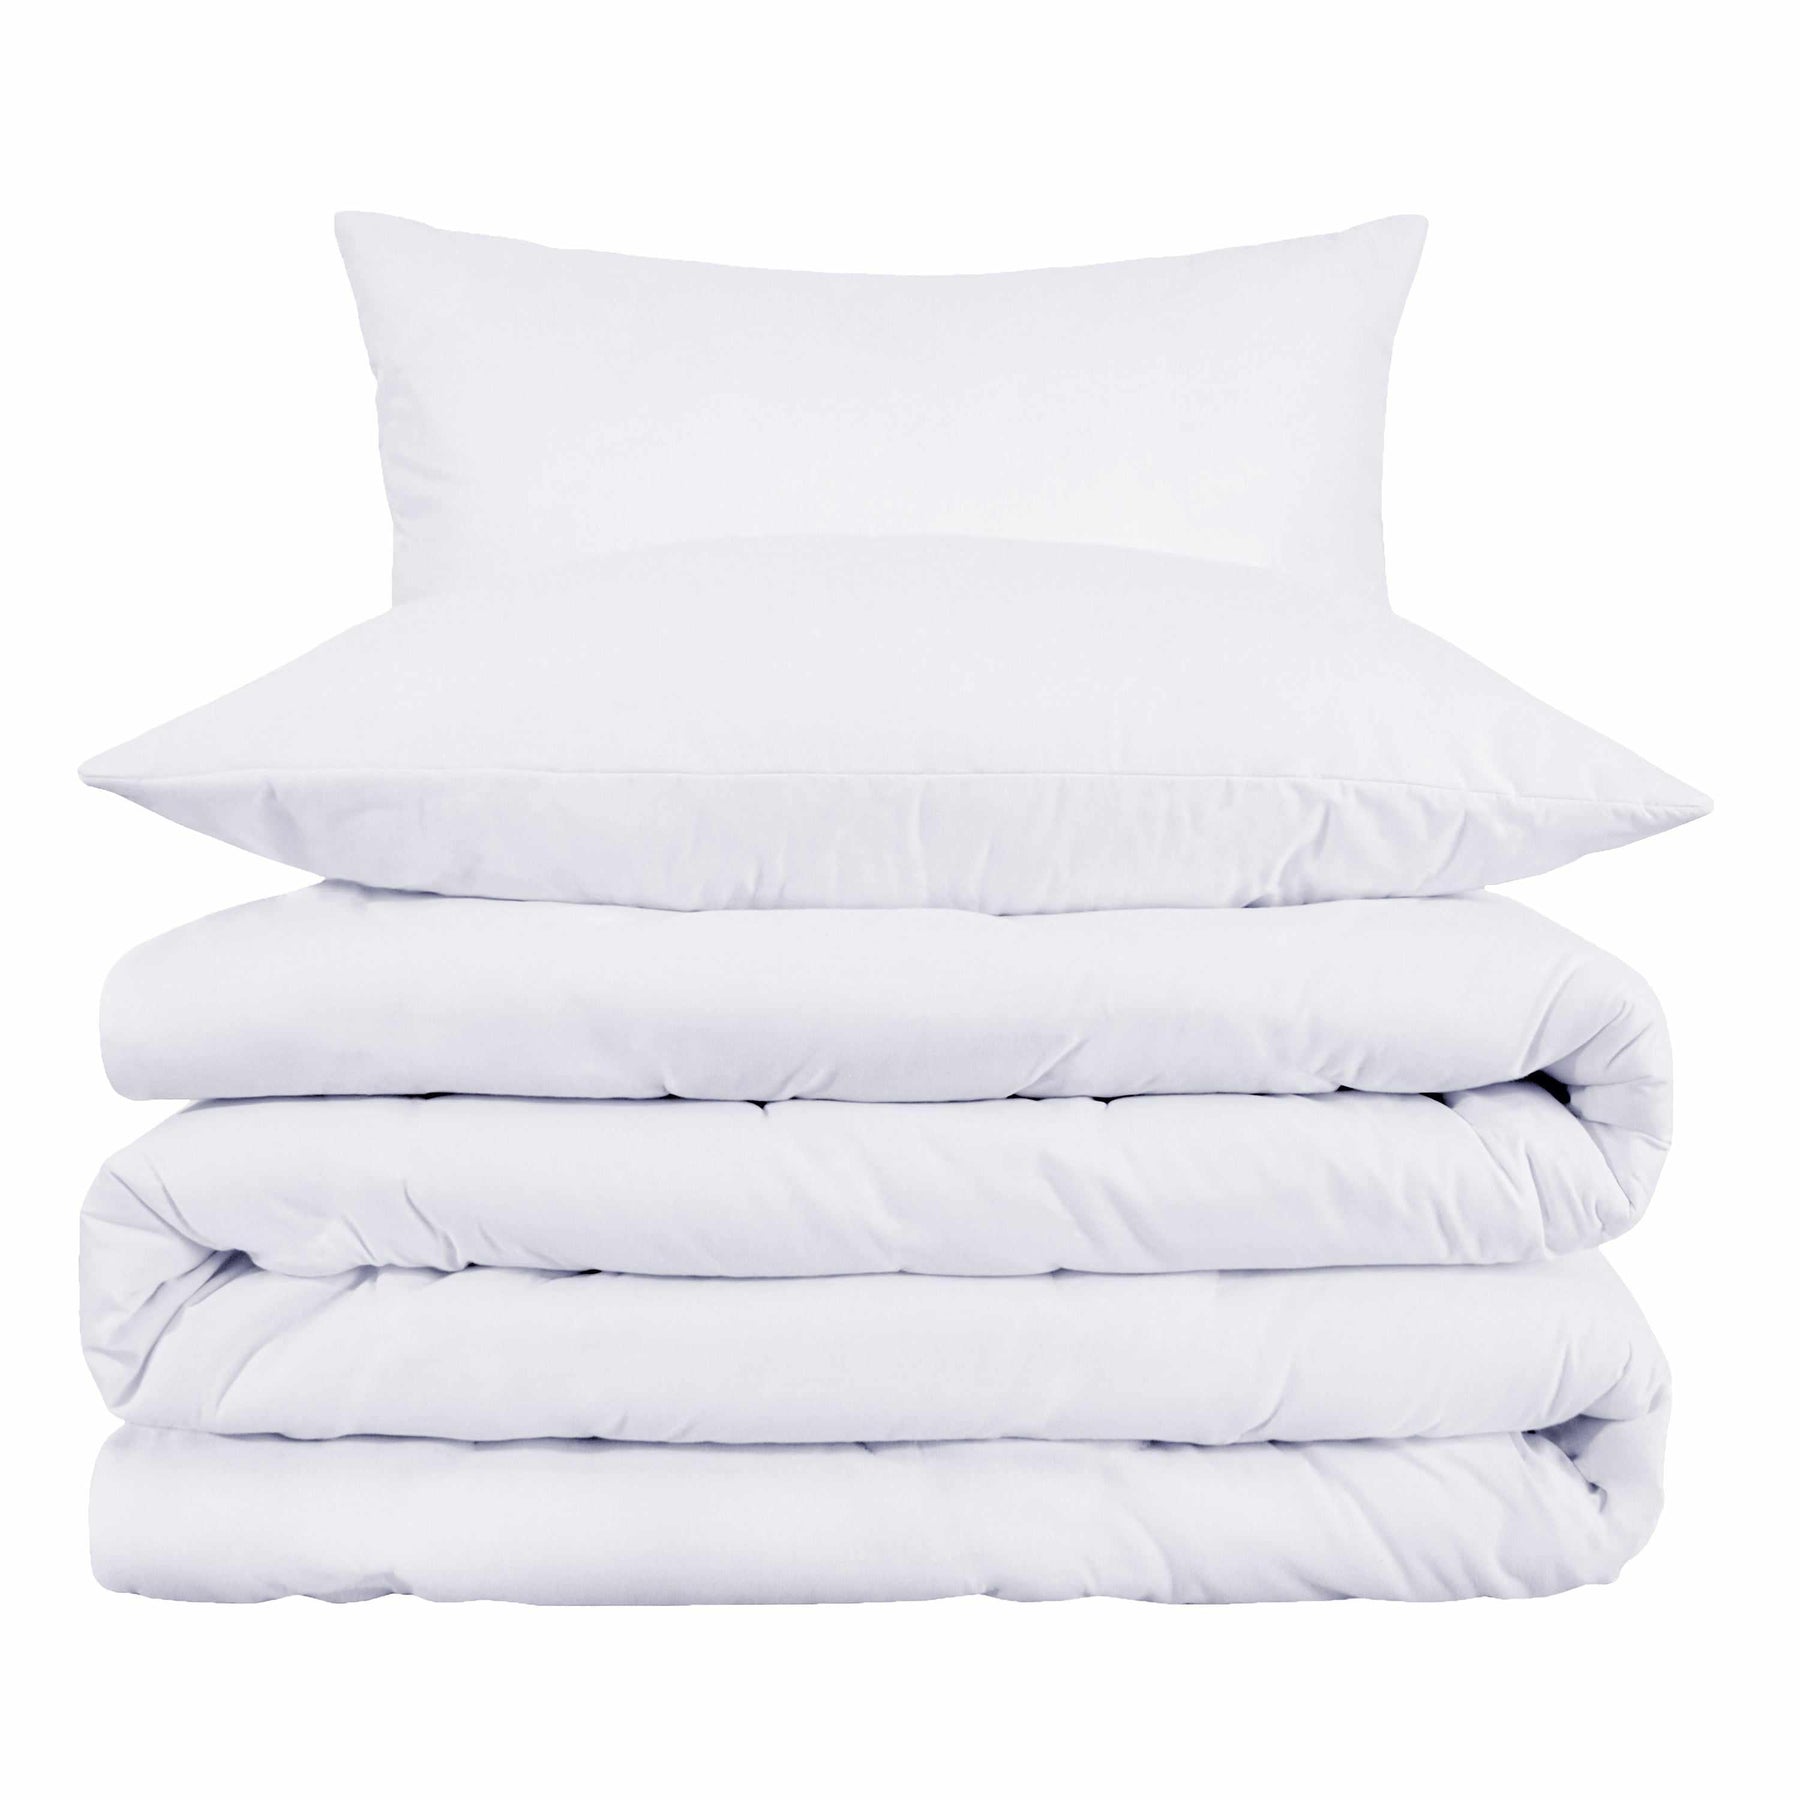  Superior Egyptian Cotton Solid All-Season Duvet Cover Set with Button Closure - White